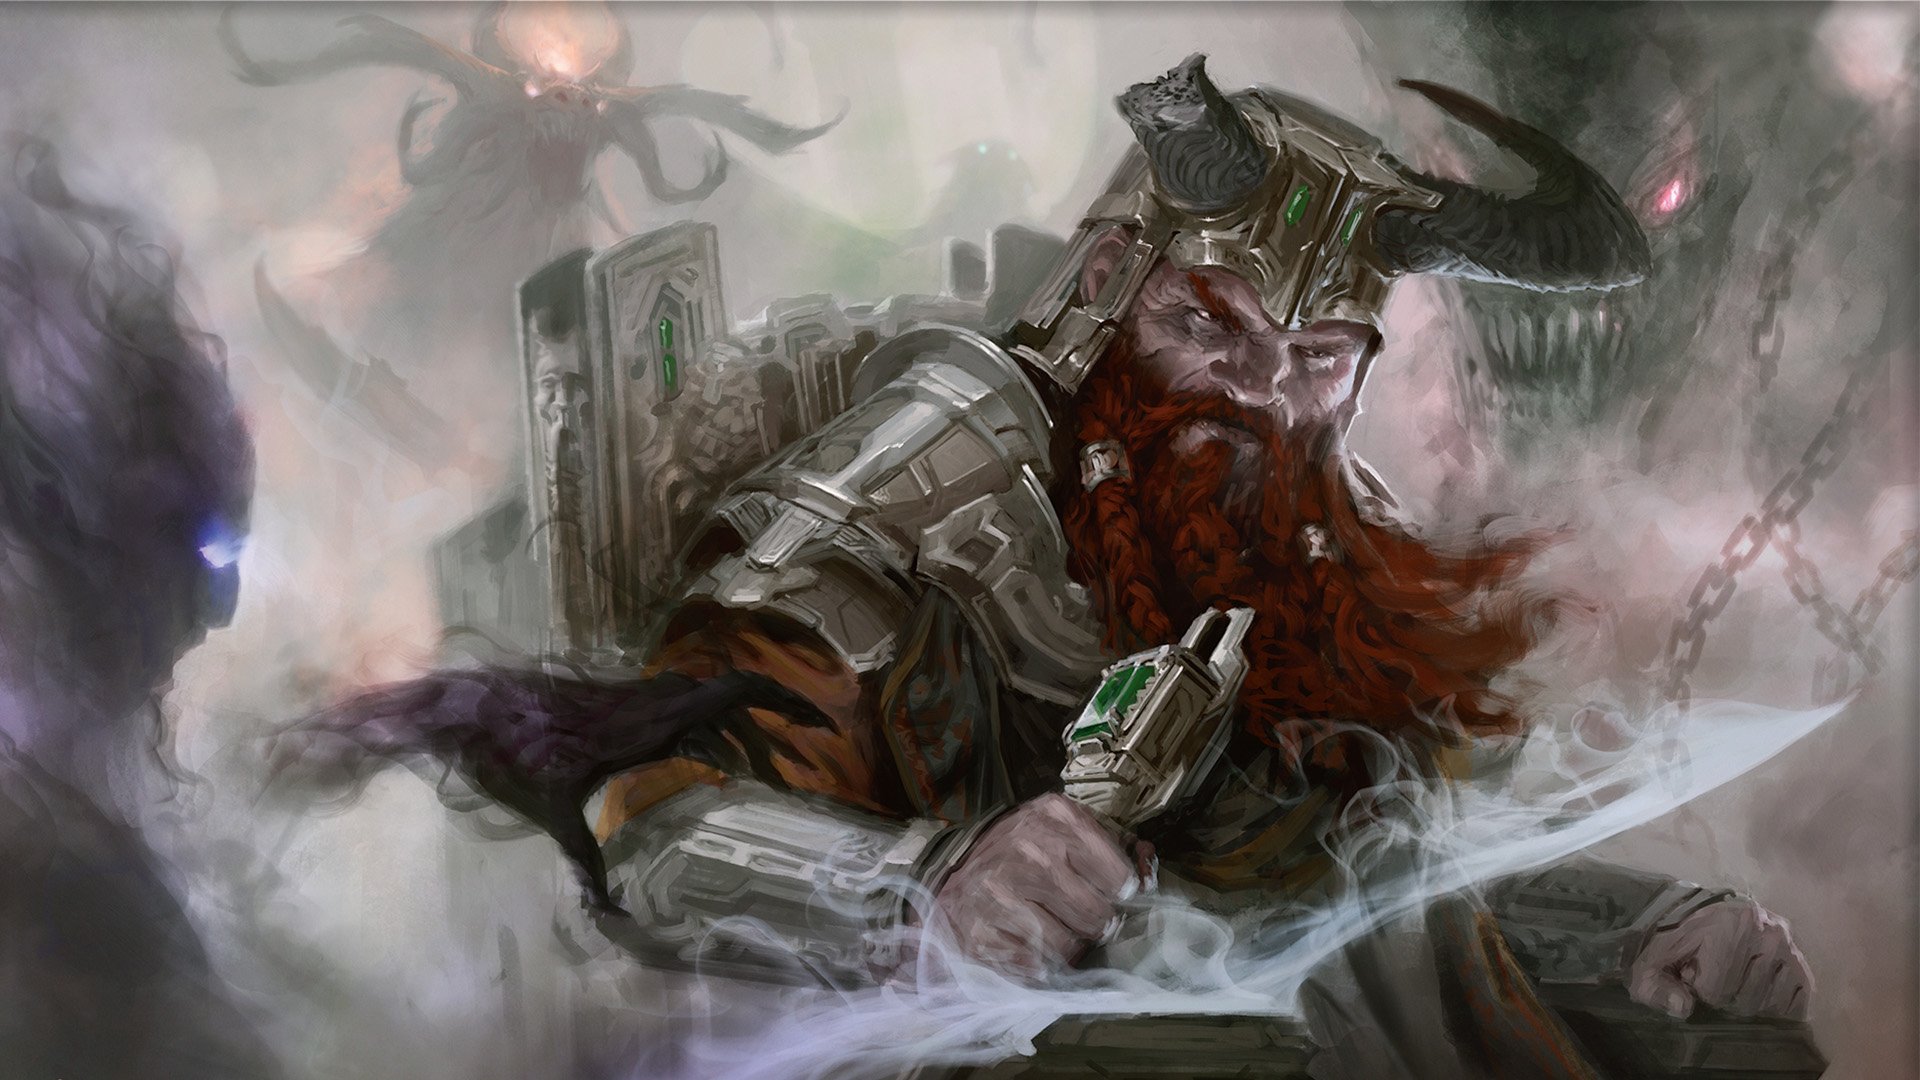 DnD Cleric 5E - Wizards of the Coast artwork showing a dwarf in a horned helmet, among a lot of grey smoke